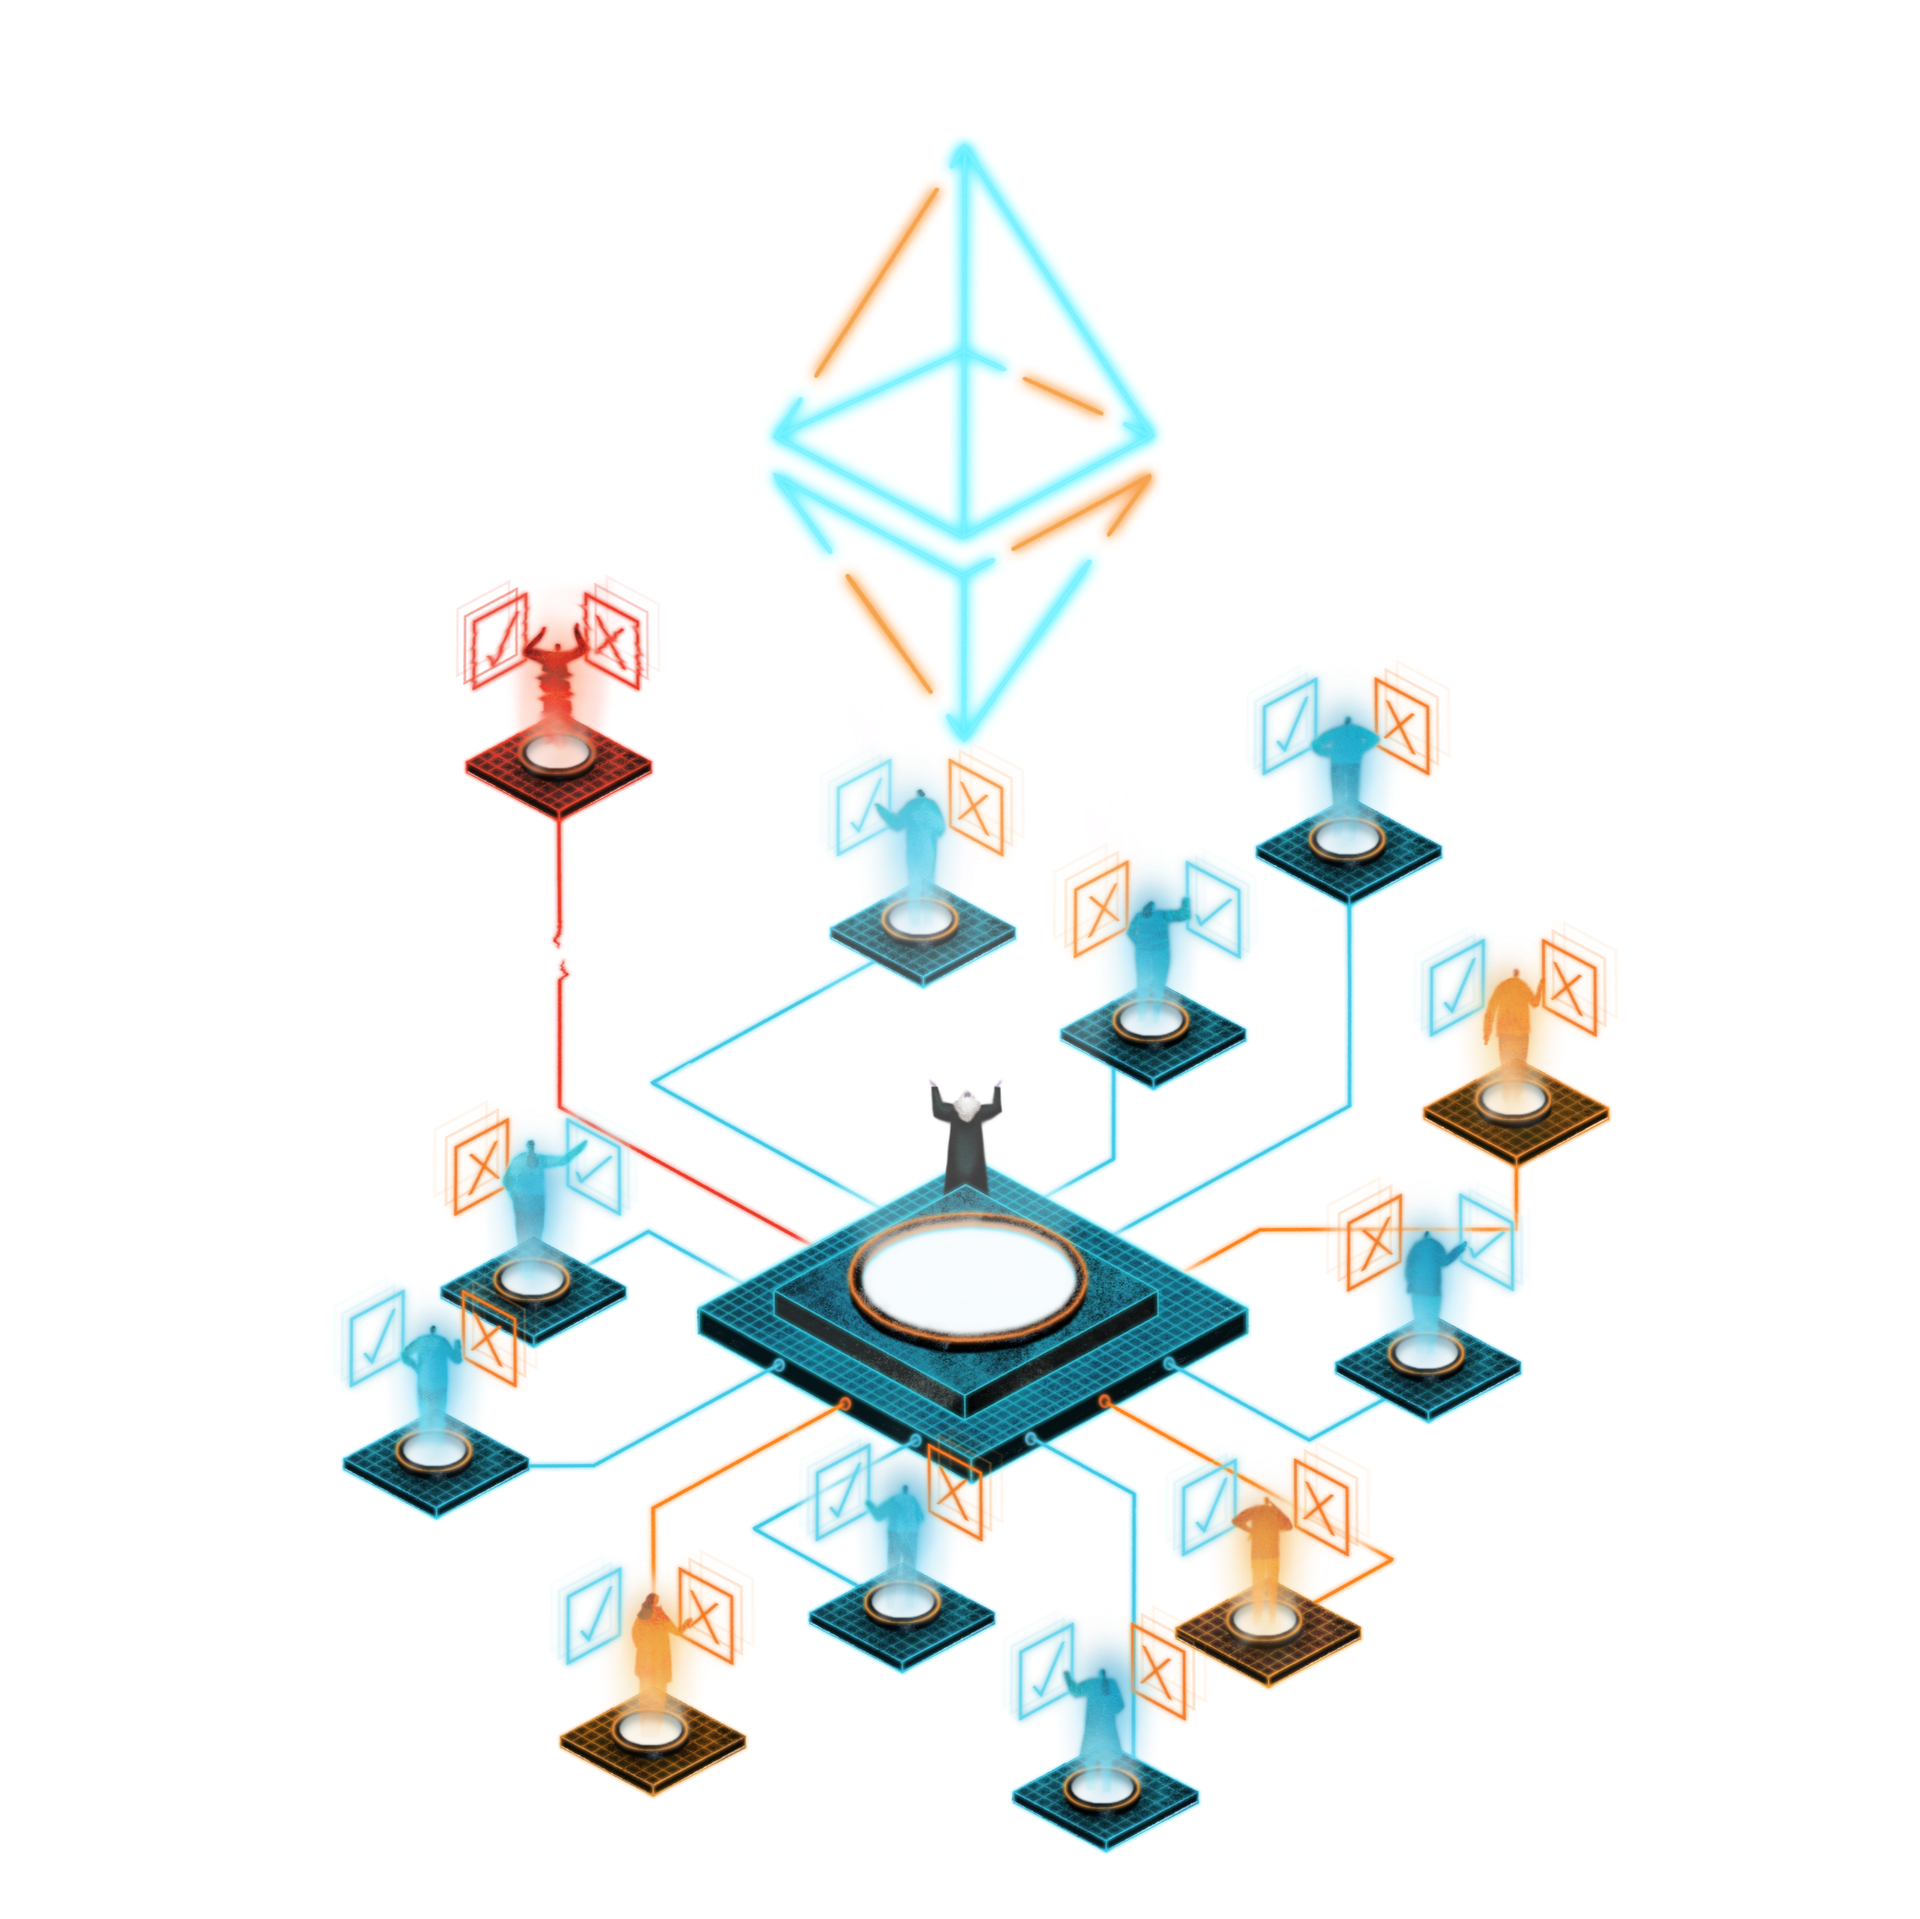 DAO by ethereum.org